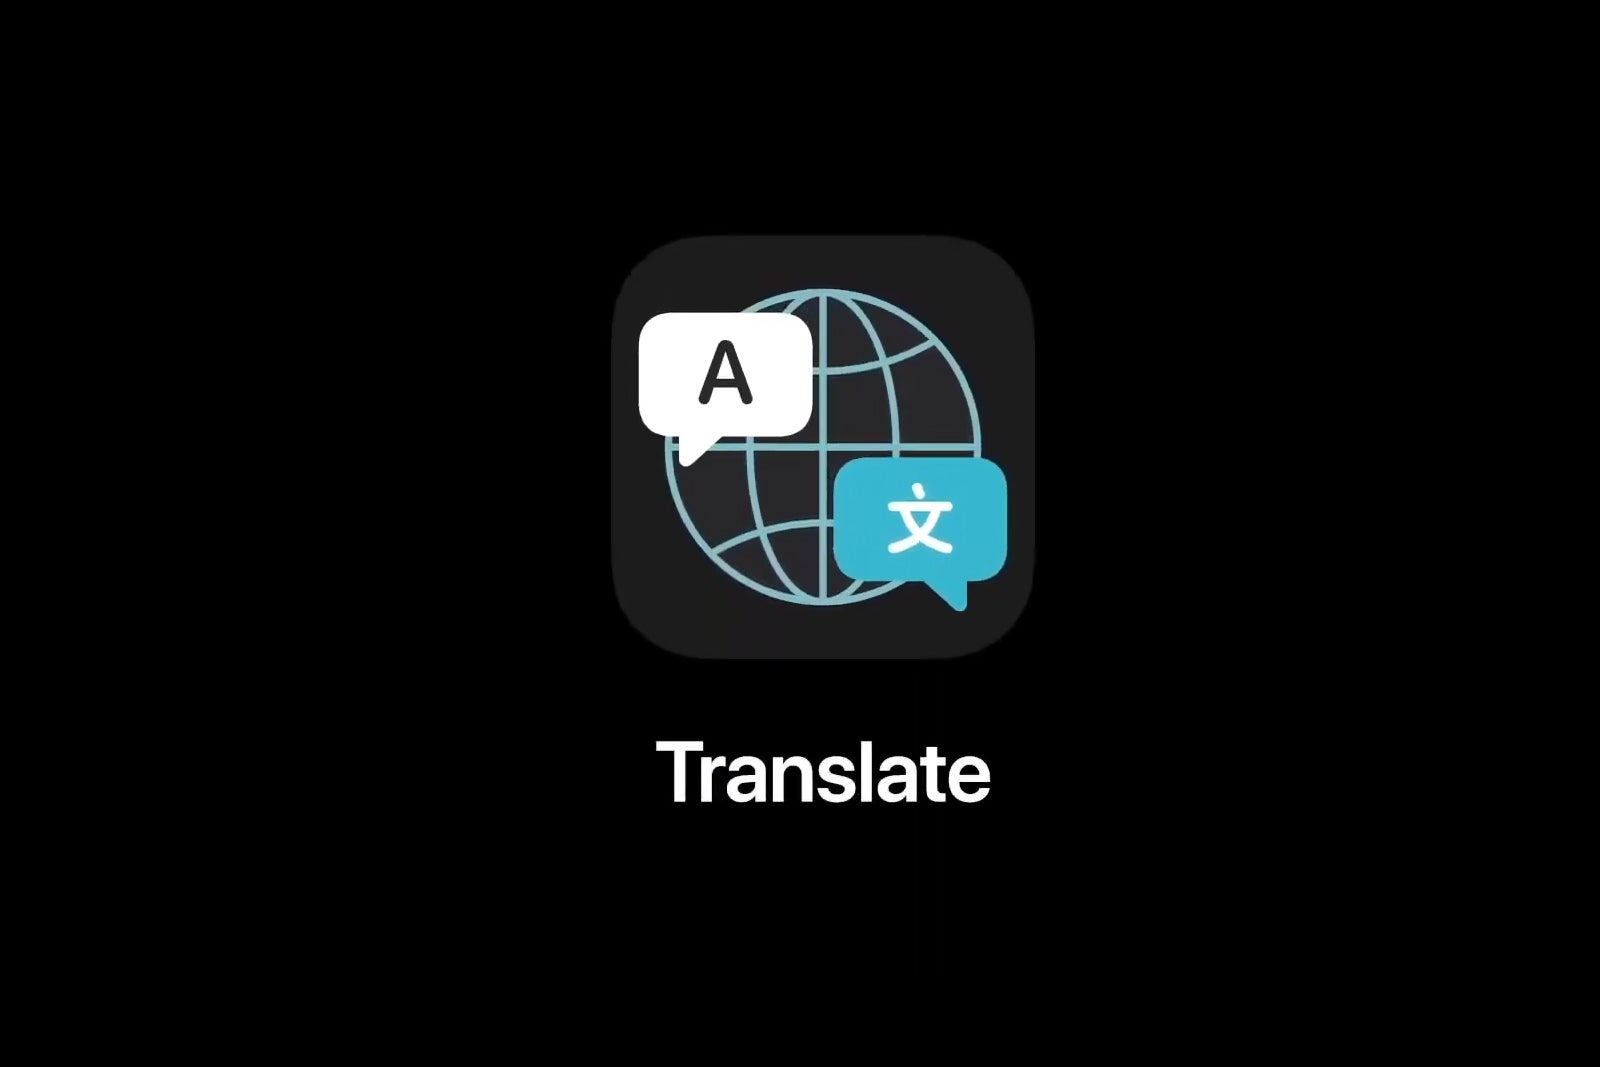 Translate is a new translation app by Apple that makes its debut in iOS 14 - iOS 14 is official – All the new features